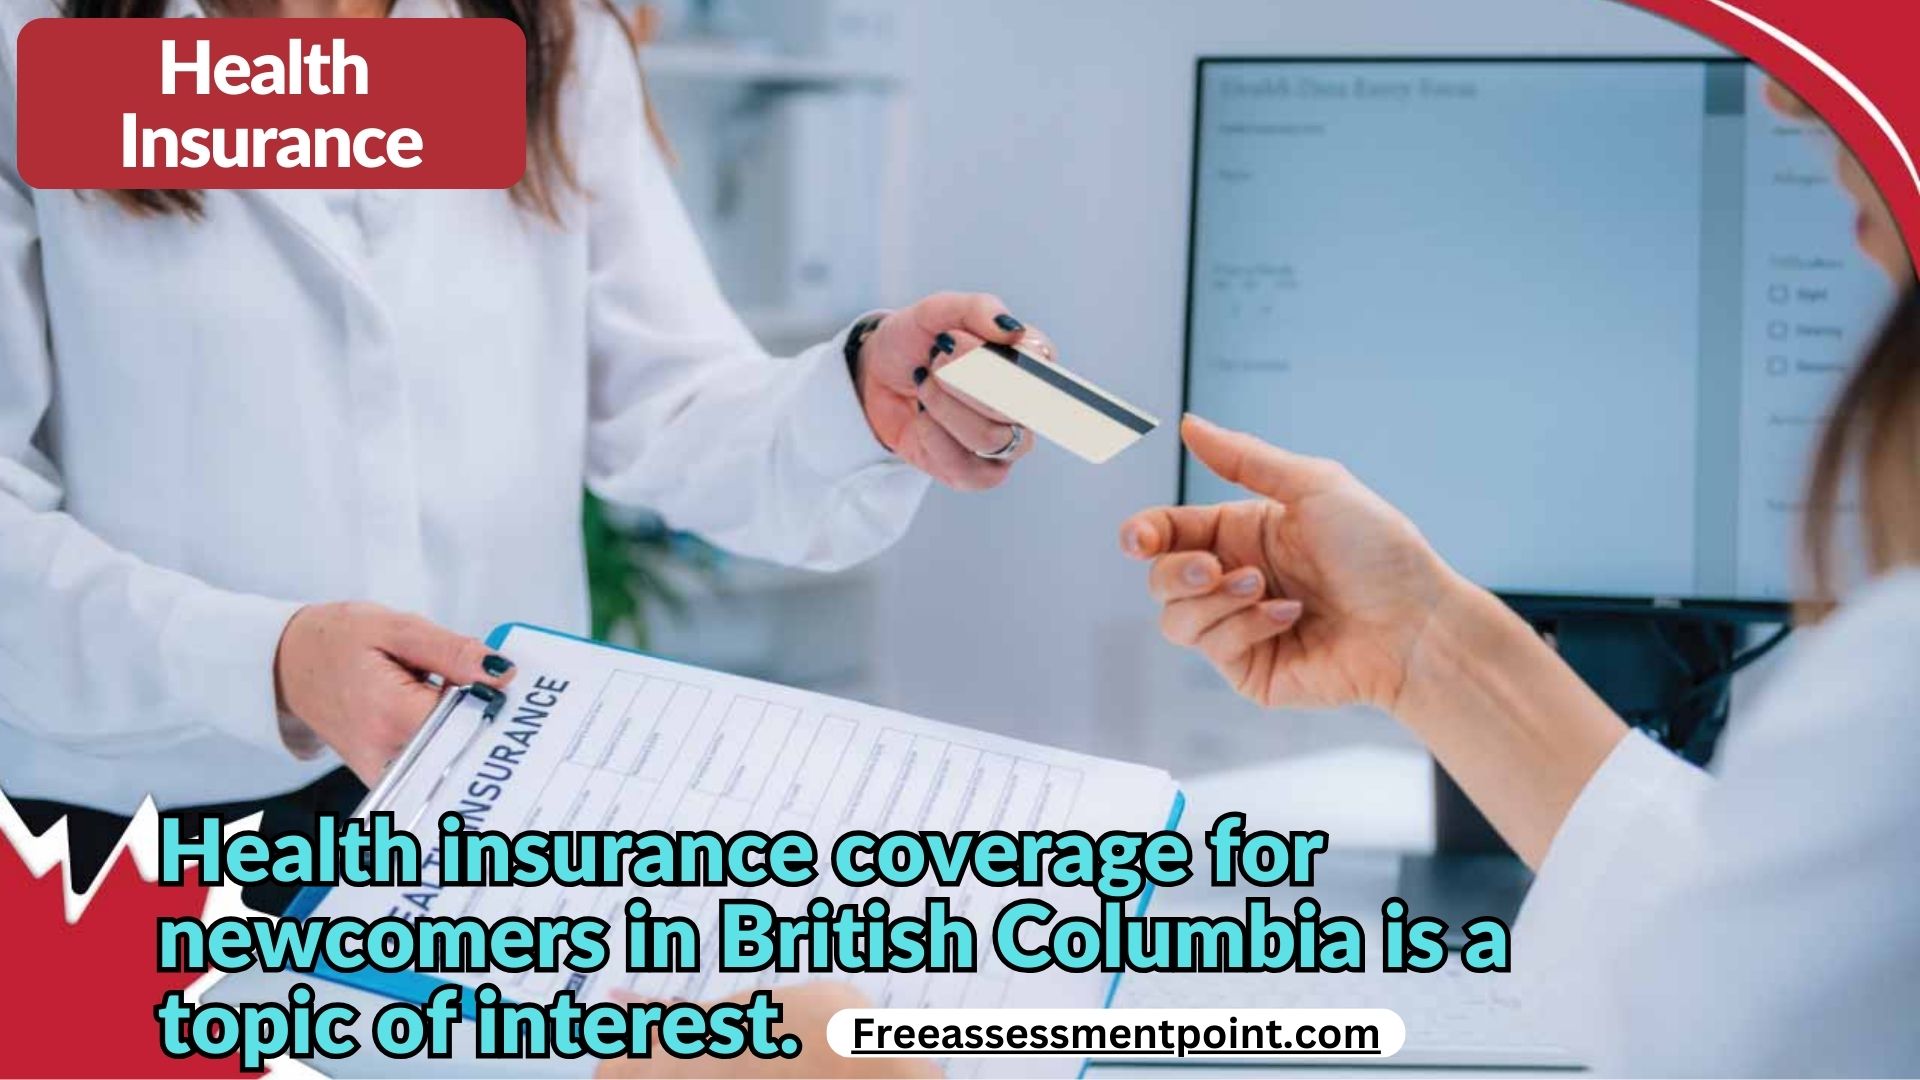 Health Insurance in British Columbia for Newcomers